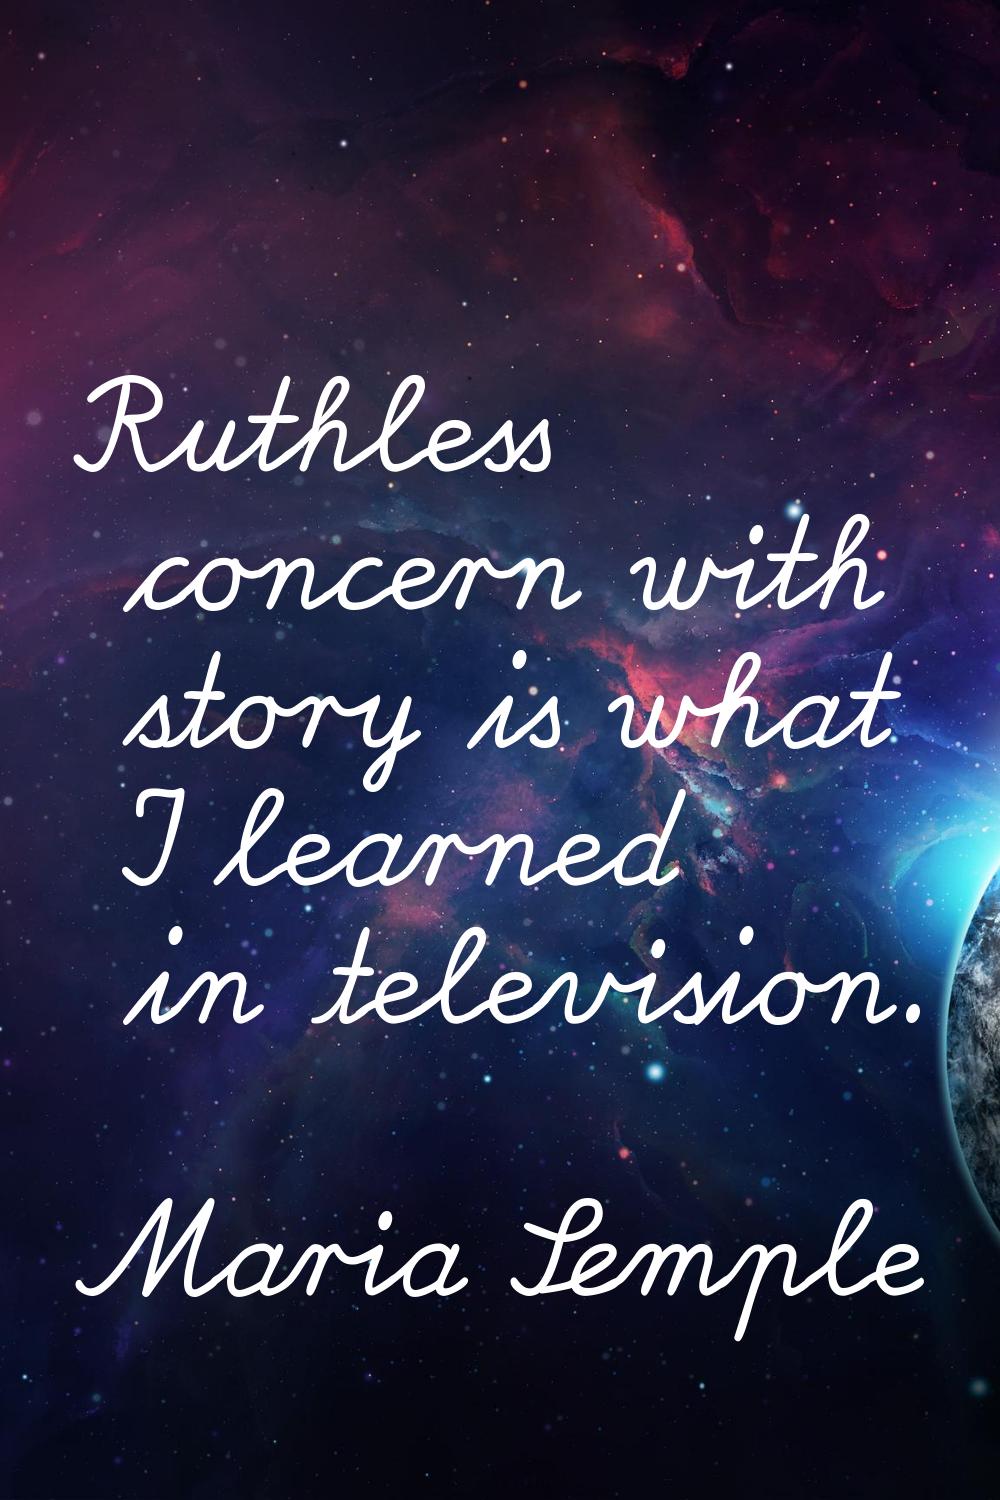 Ruthless concern with story is what I learned in television.